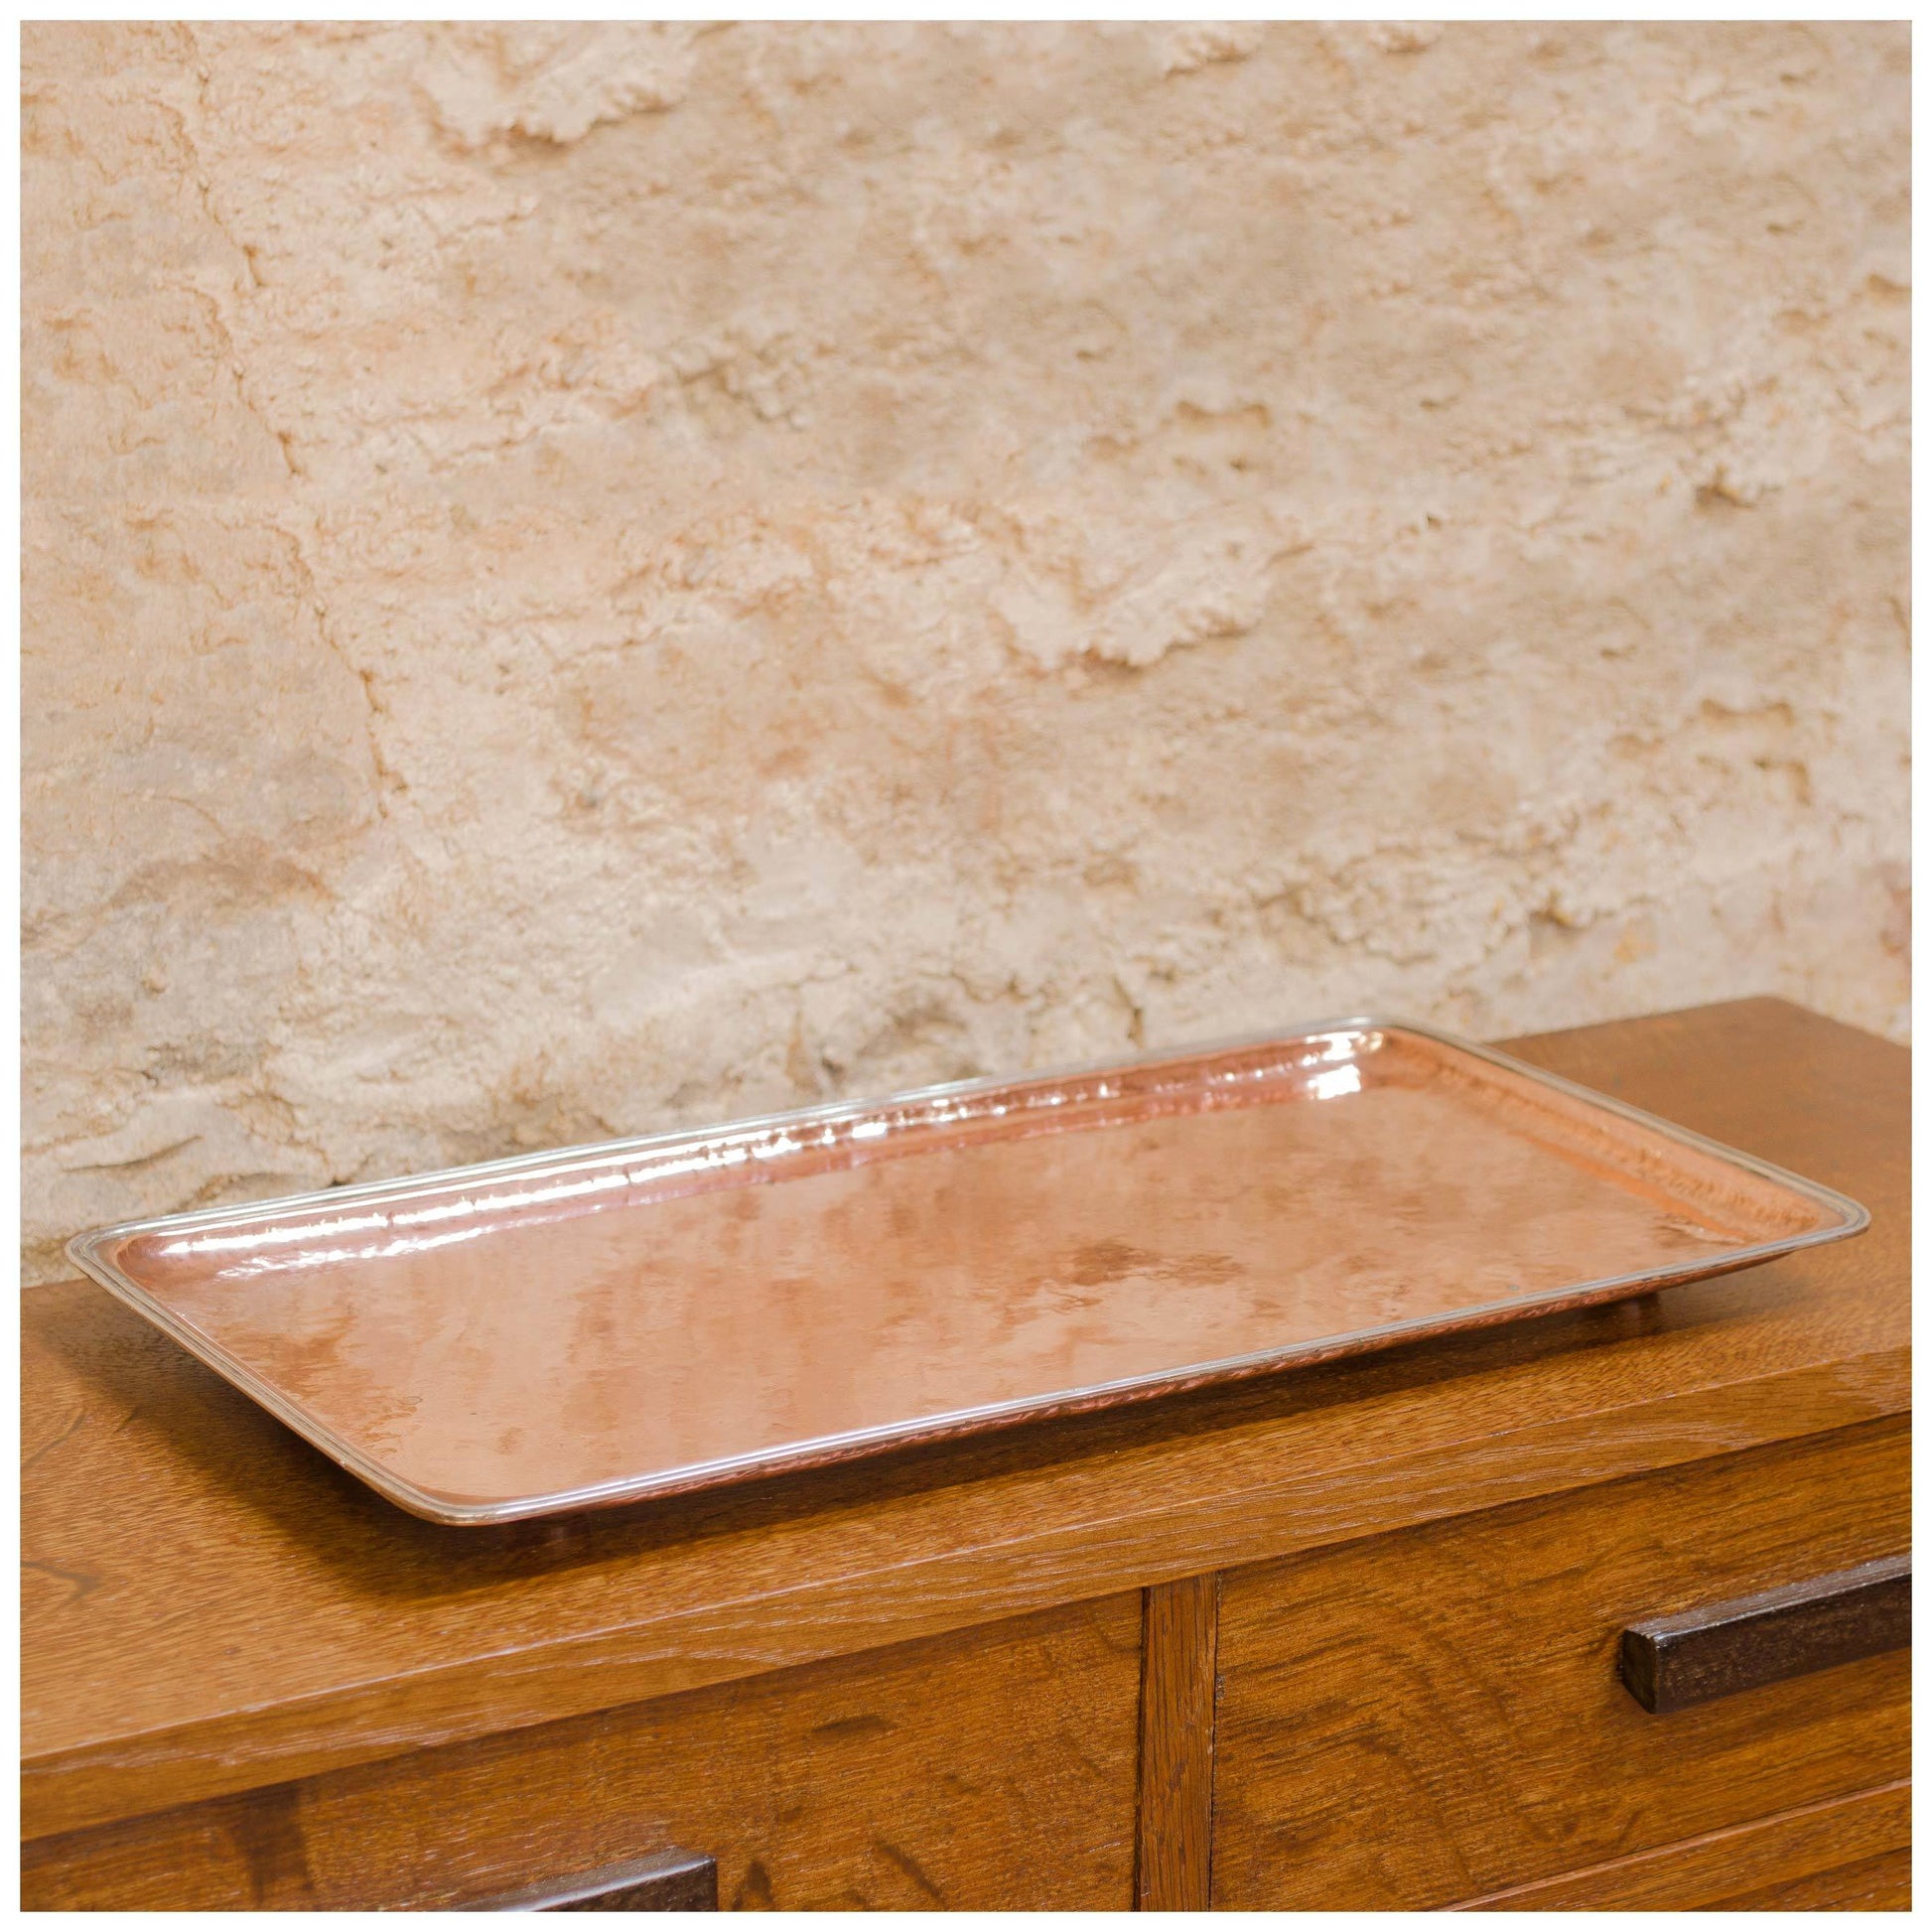 An Arts & Crafts Lakes School hand beaten copper tray by Fanny Carter